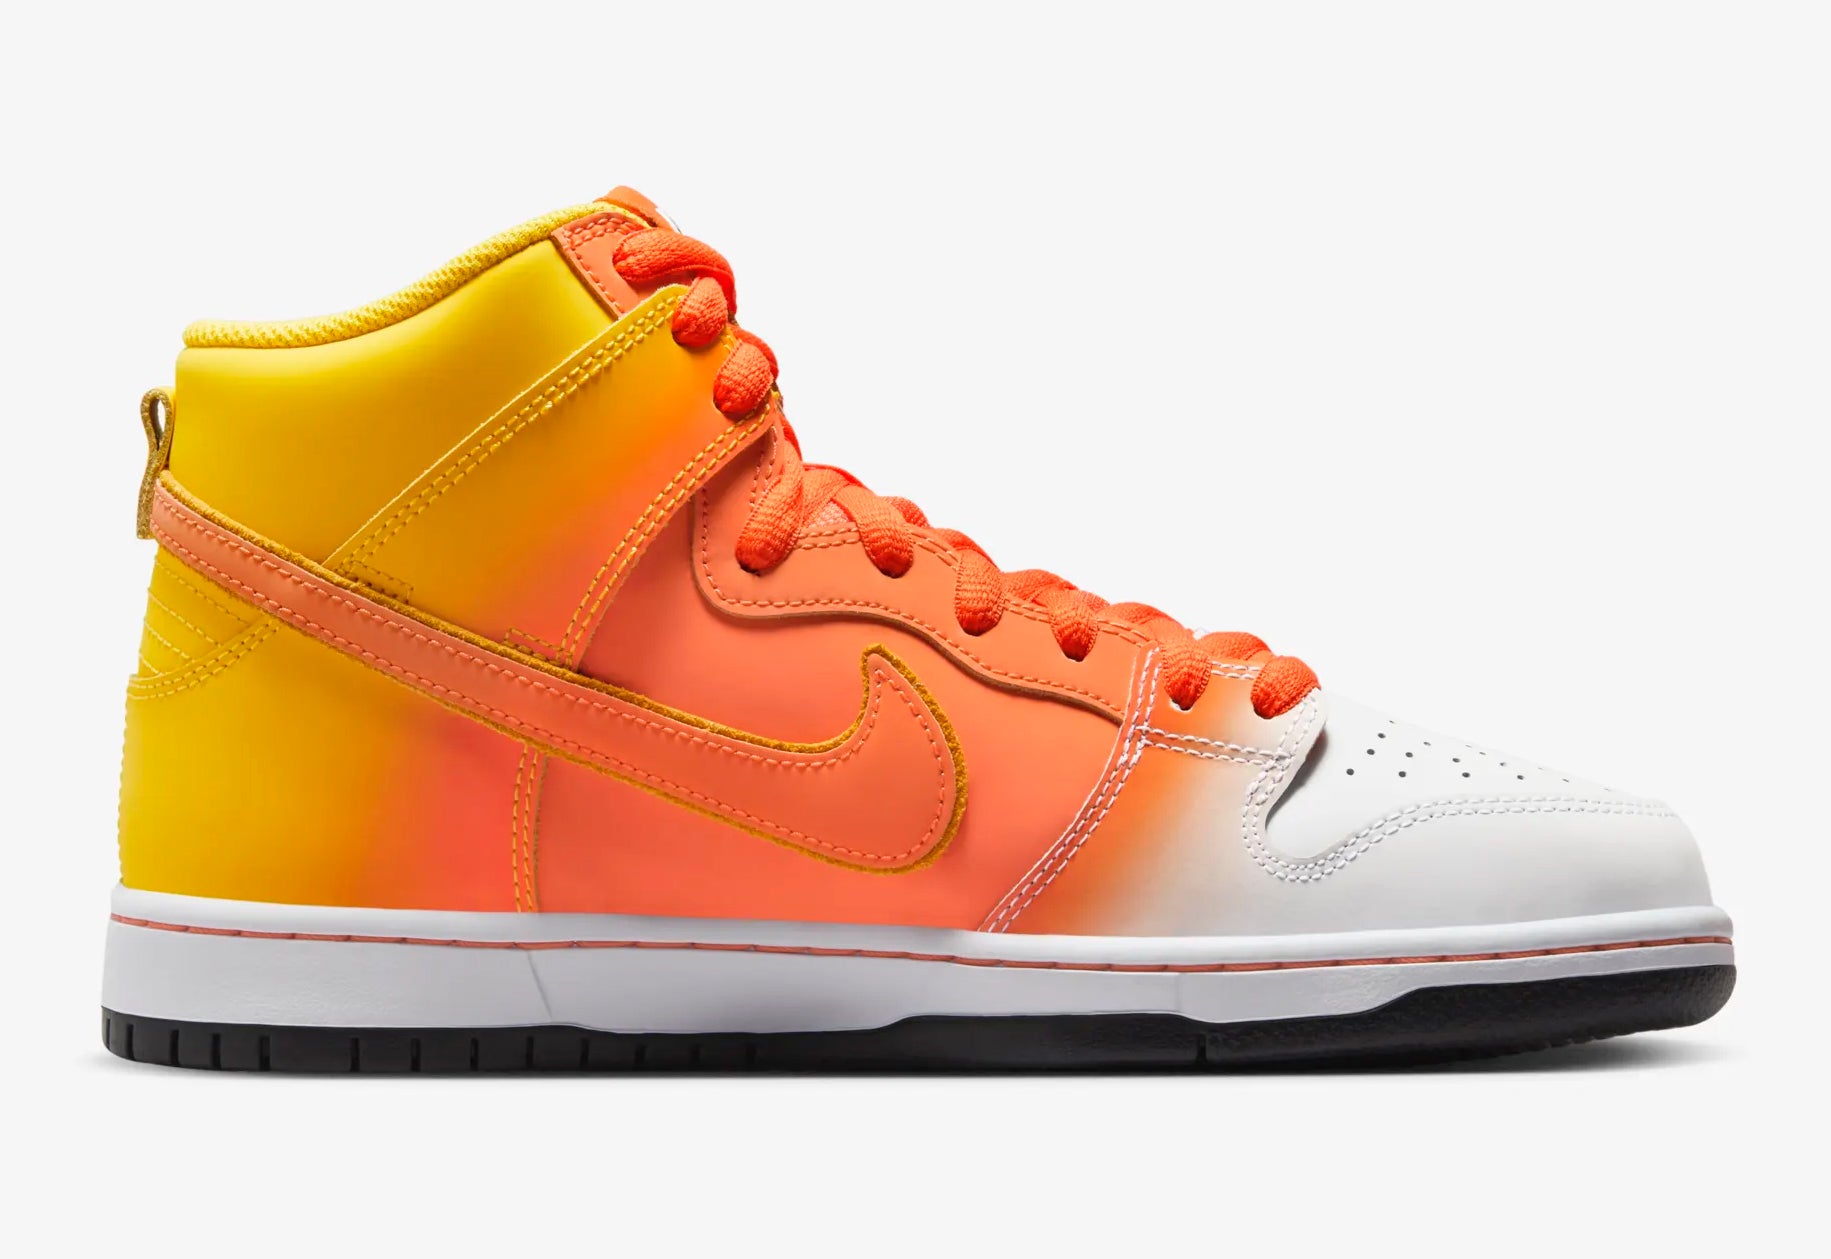 Nike SB Dunk High Sweet Tooth Candy Corn Release Date FN5107-700 Medial